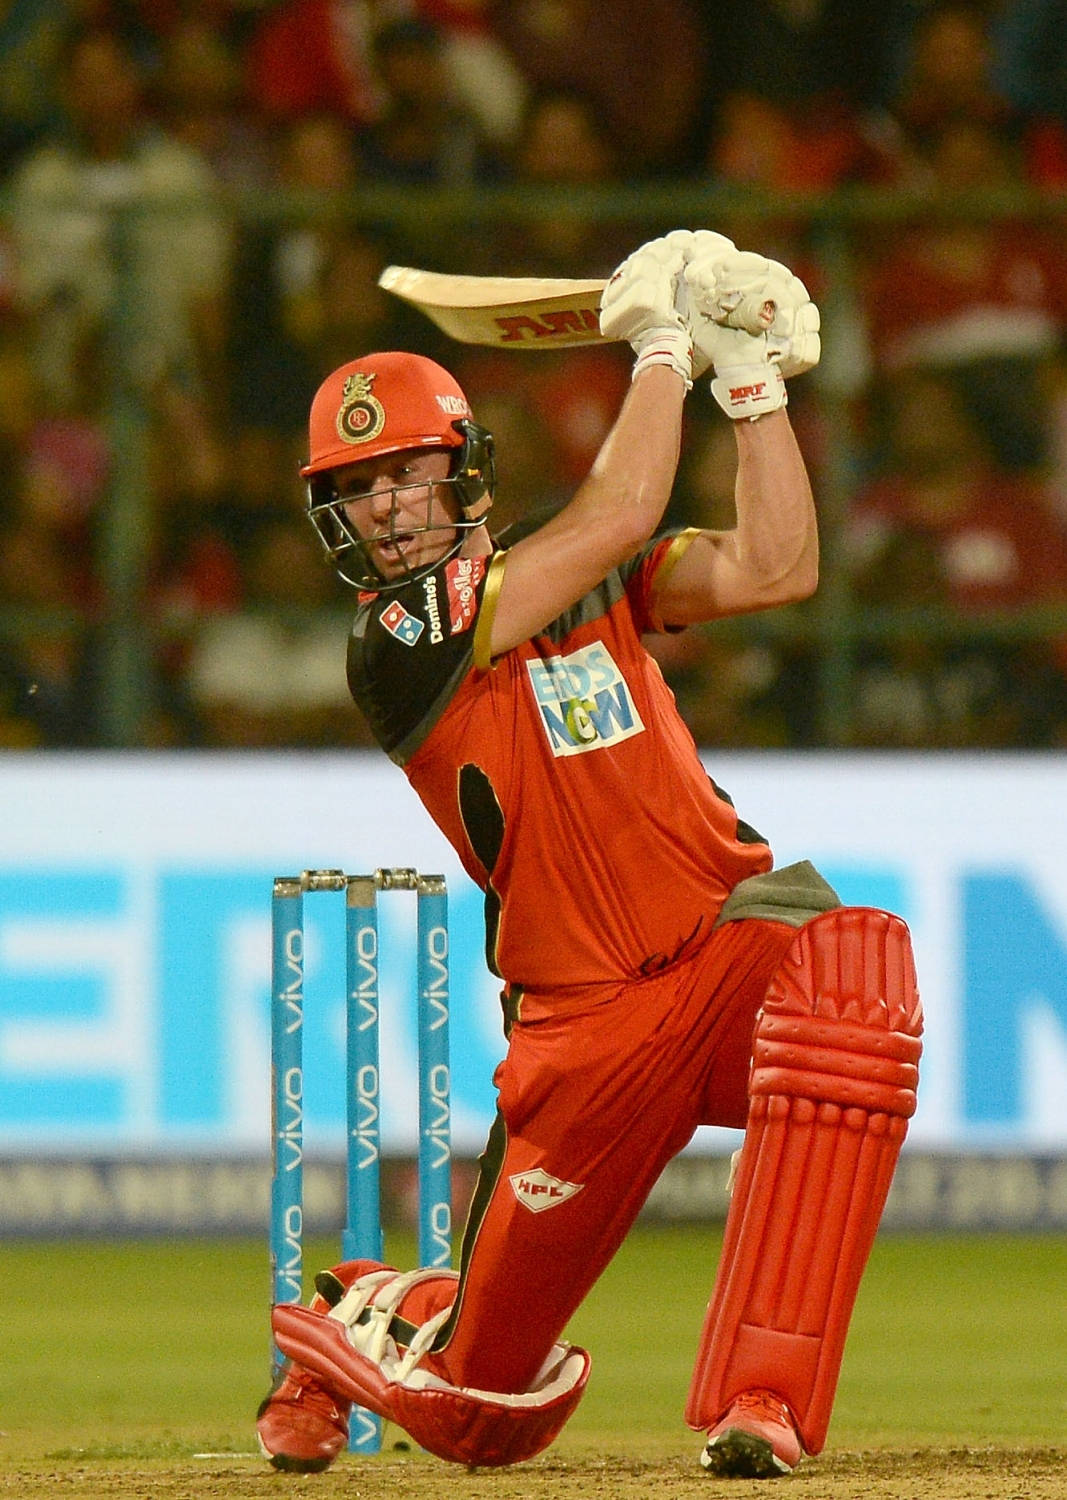 Power Stance - The On-field Strength Of Ab De Villiers In Rcb Gear